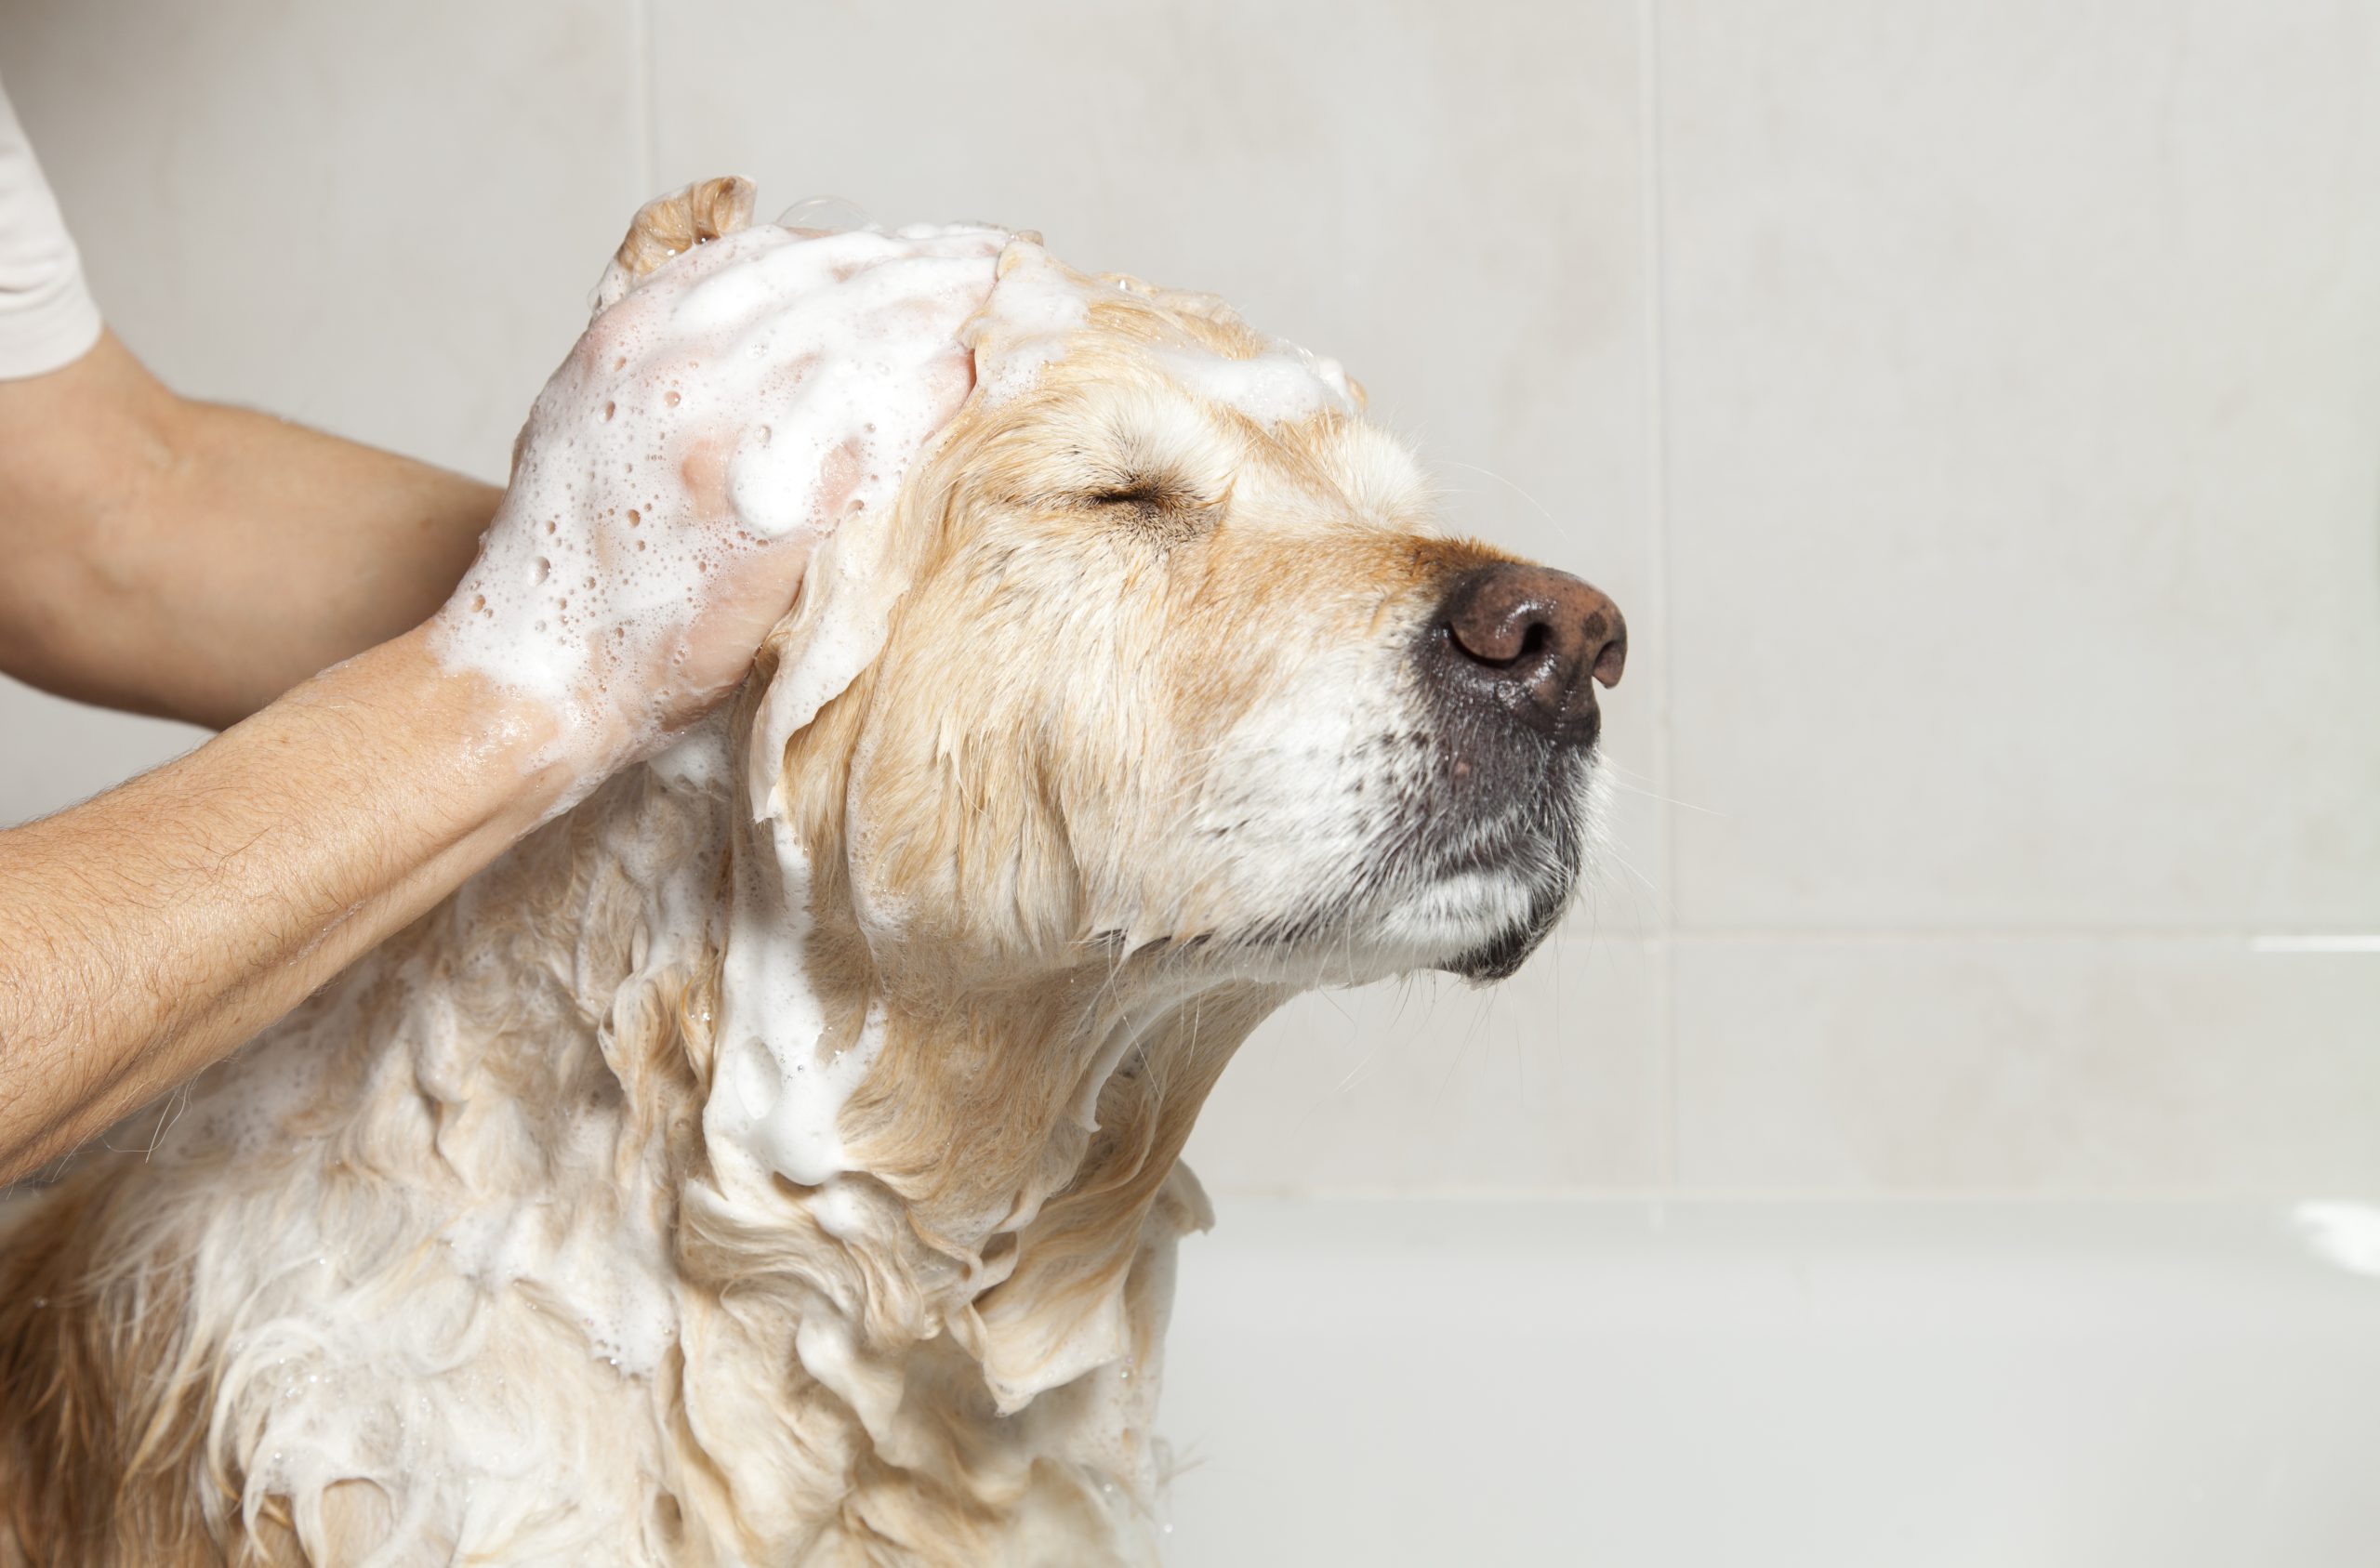 A dog happily taking a bath, showing a pet's cooperation in hygiene practices.